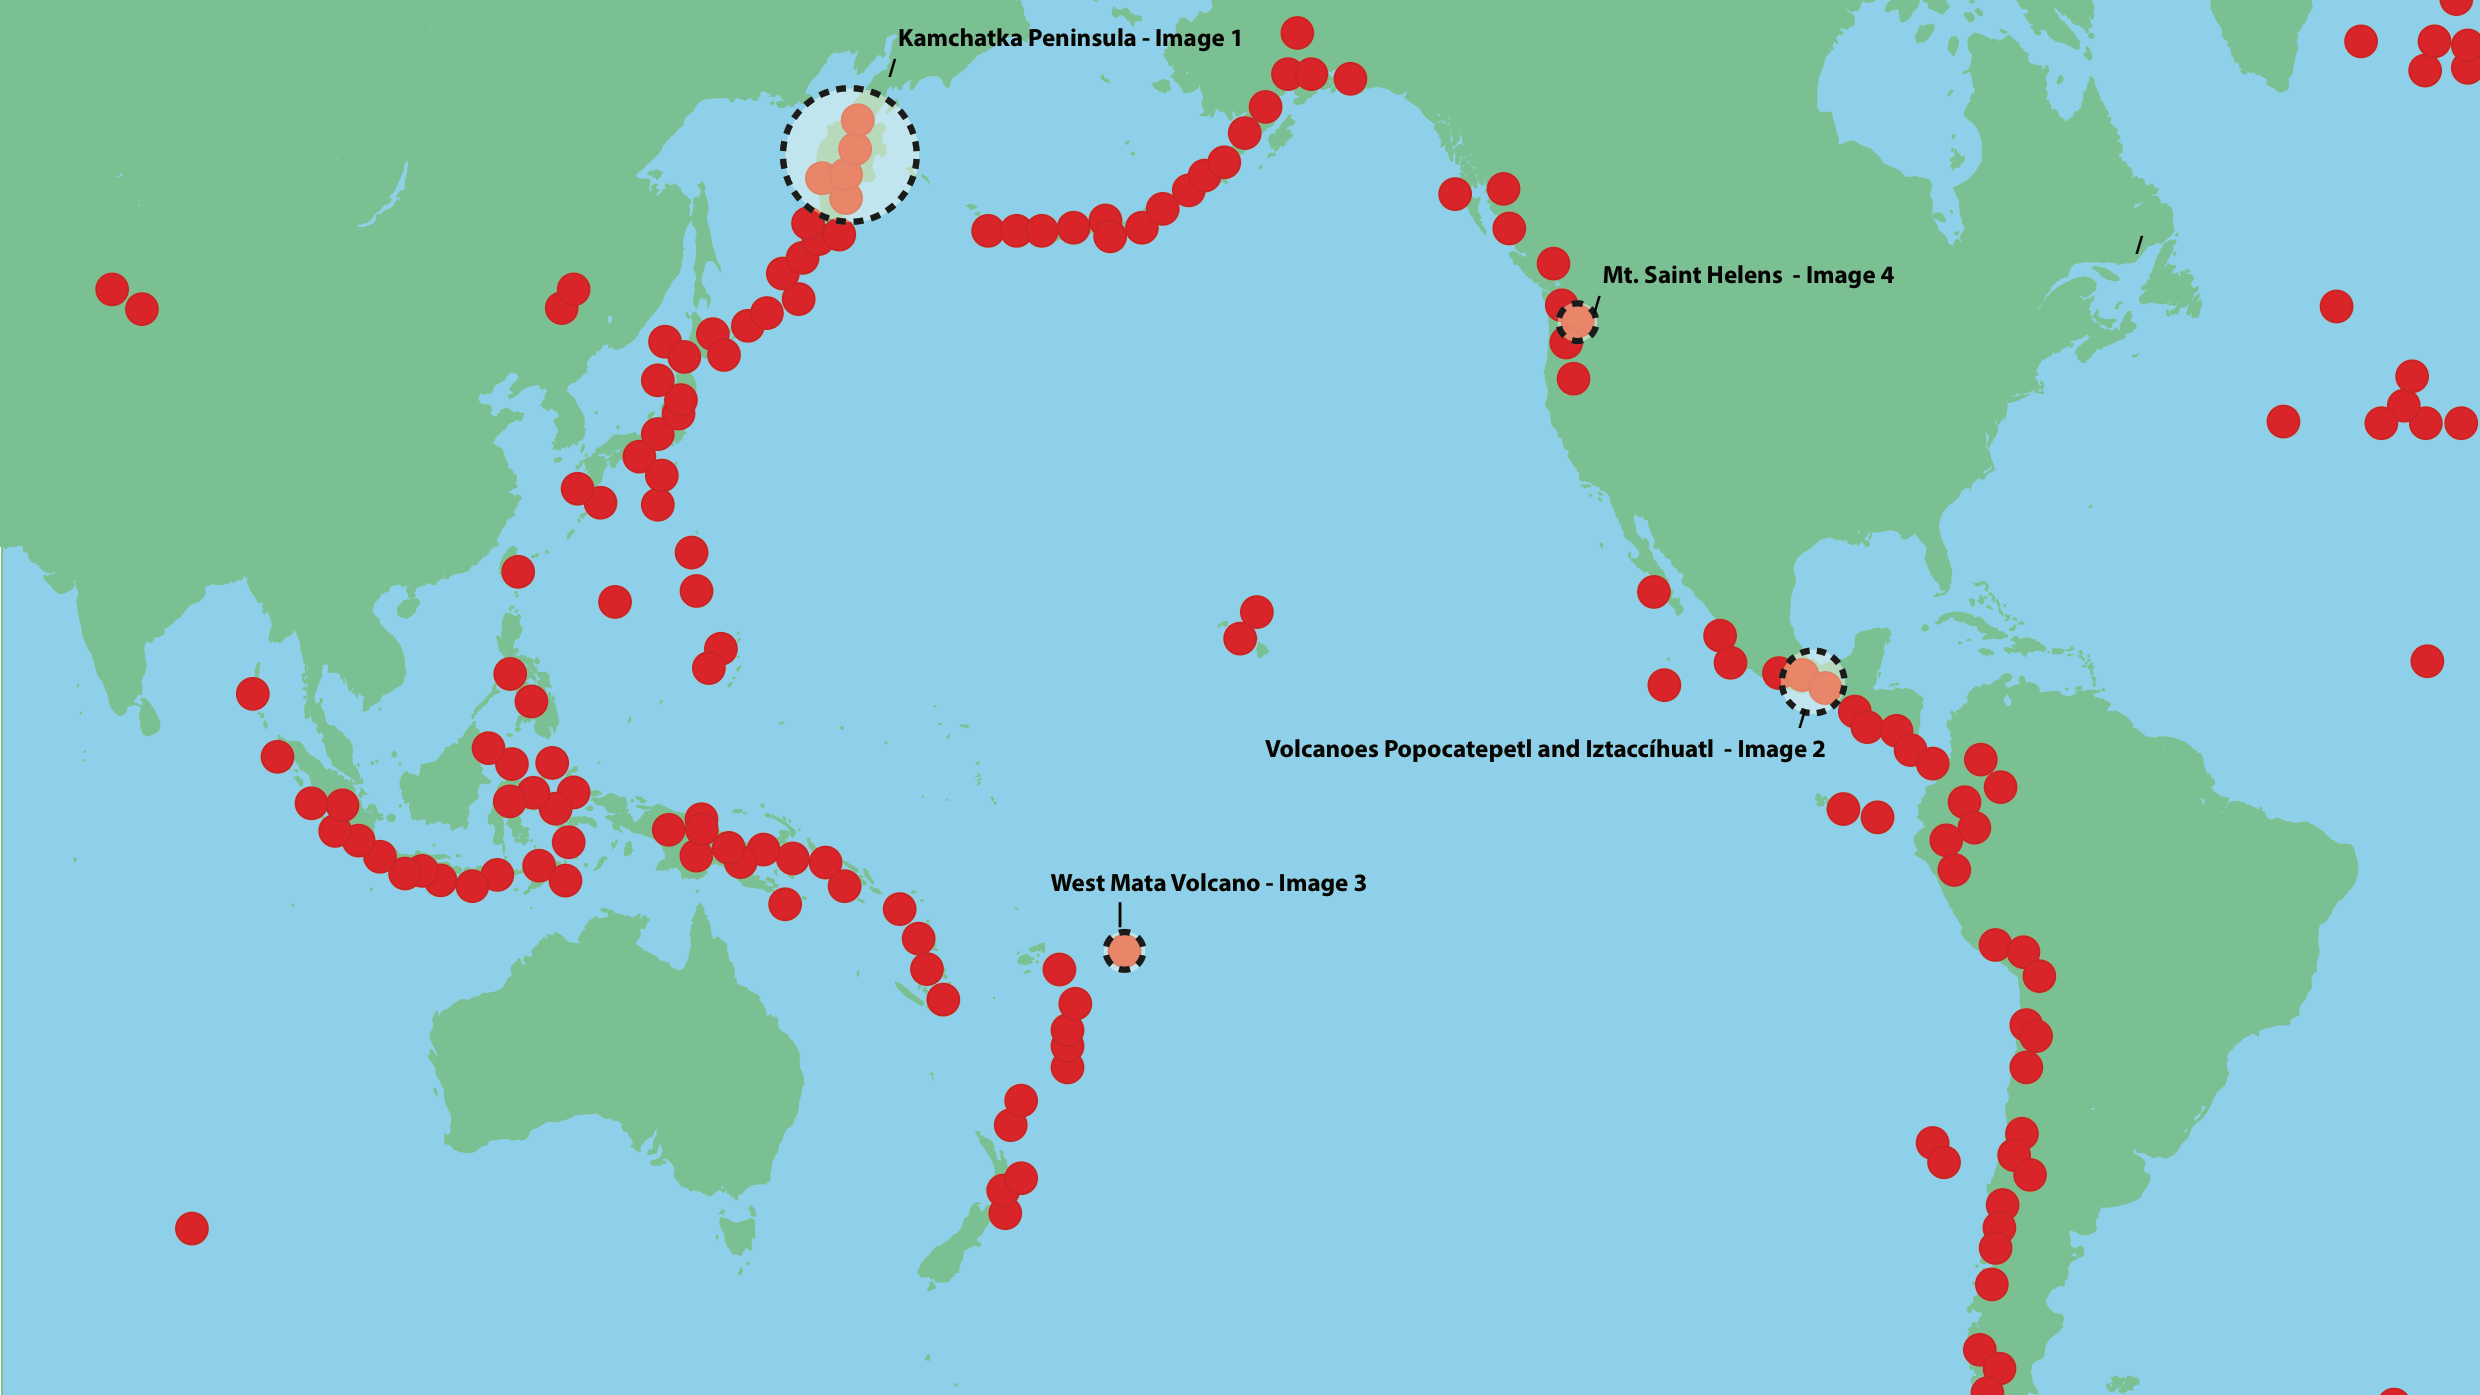 A map of the Pacific Ocean with red dots for volcanoes.